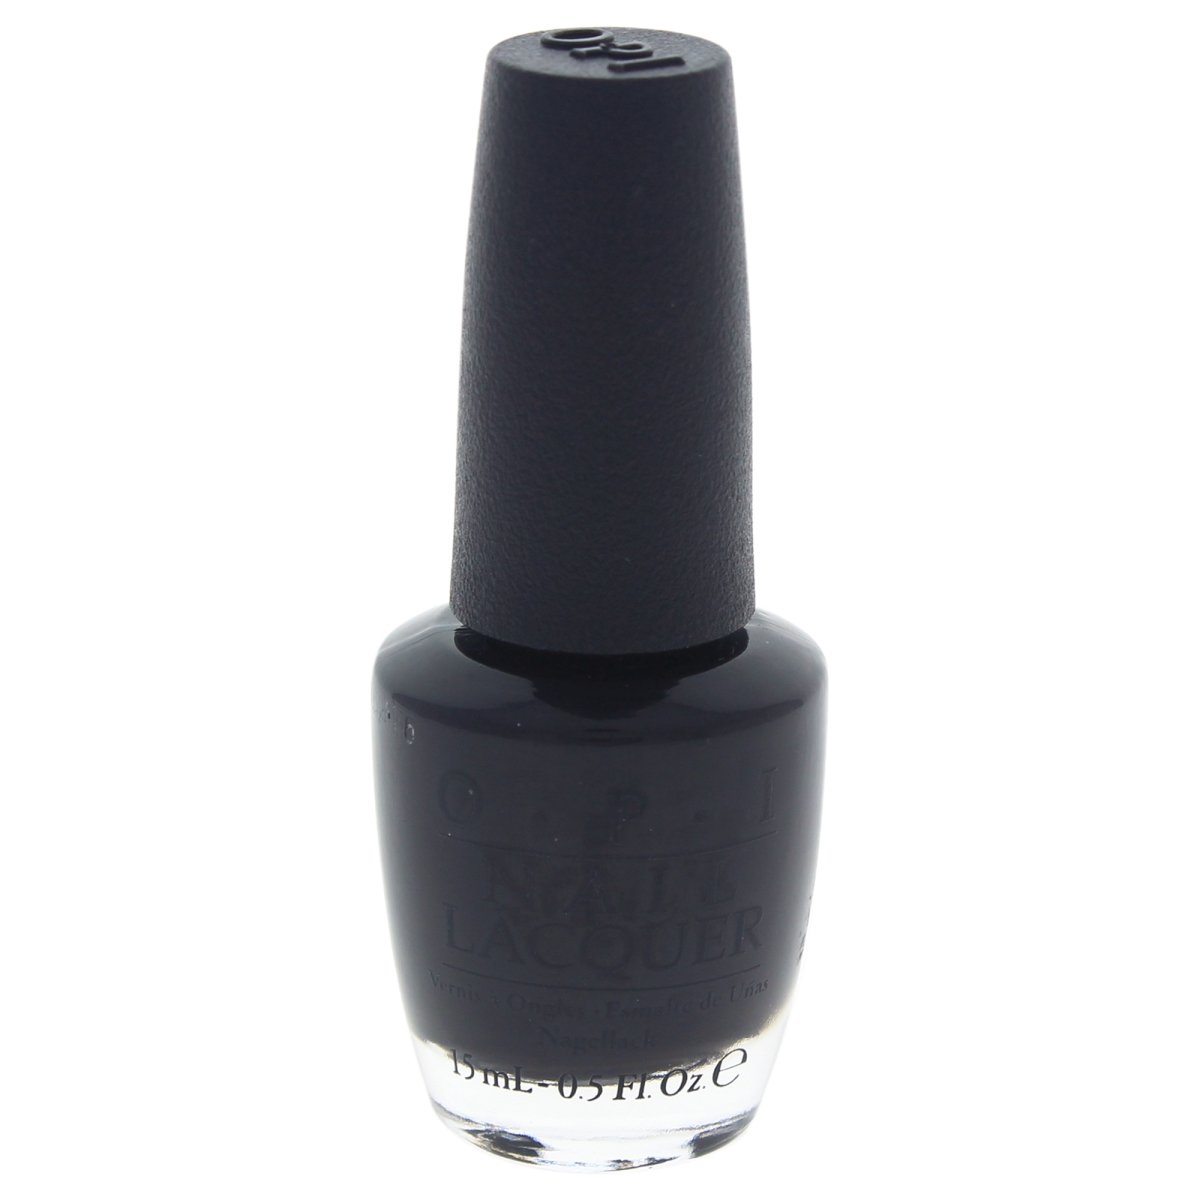 W-c-12445 Nail Lacquer No. Nl V36 My Gondola Or Yours Nail Polish For Women - 0.5 Oz